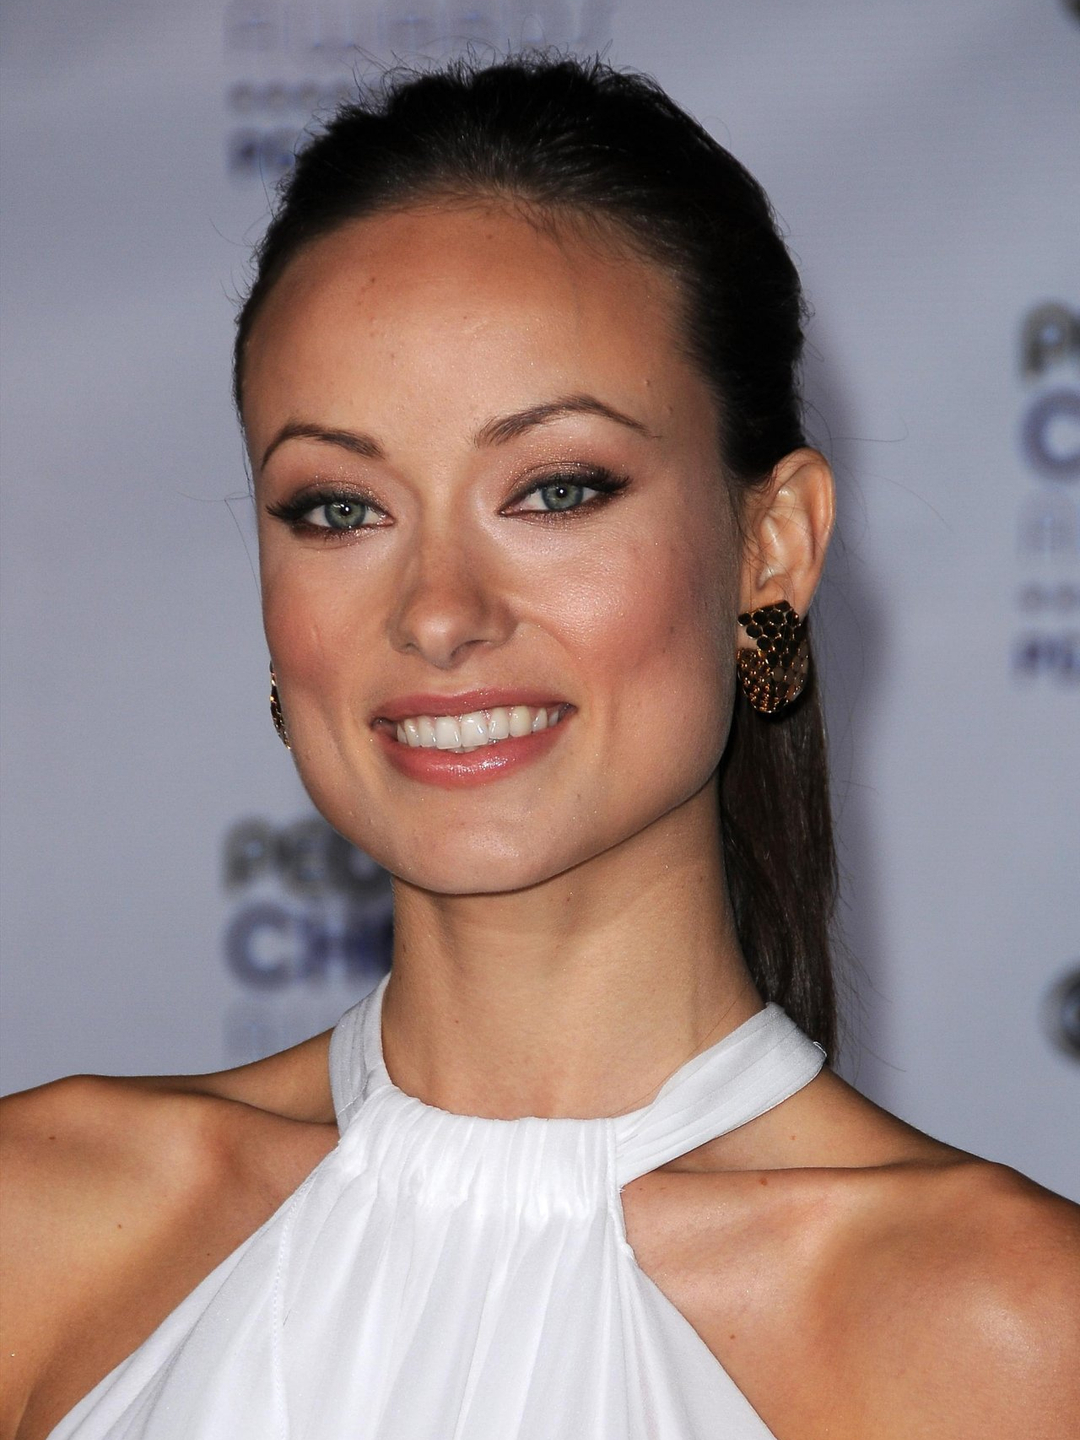 Olivia Wilde young age